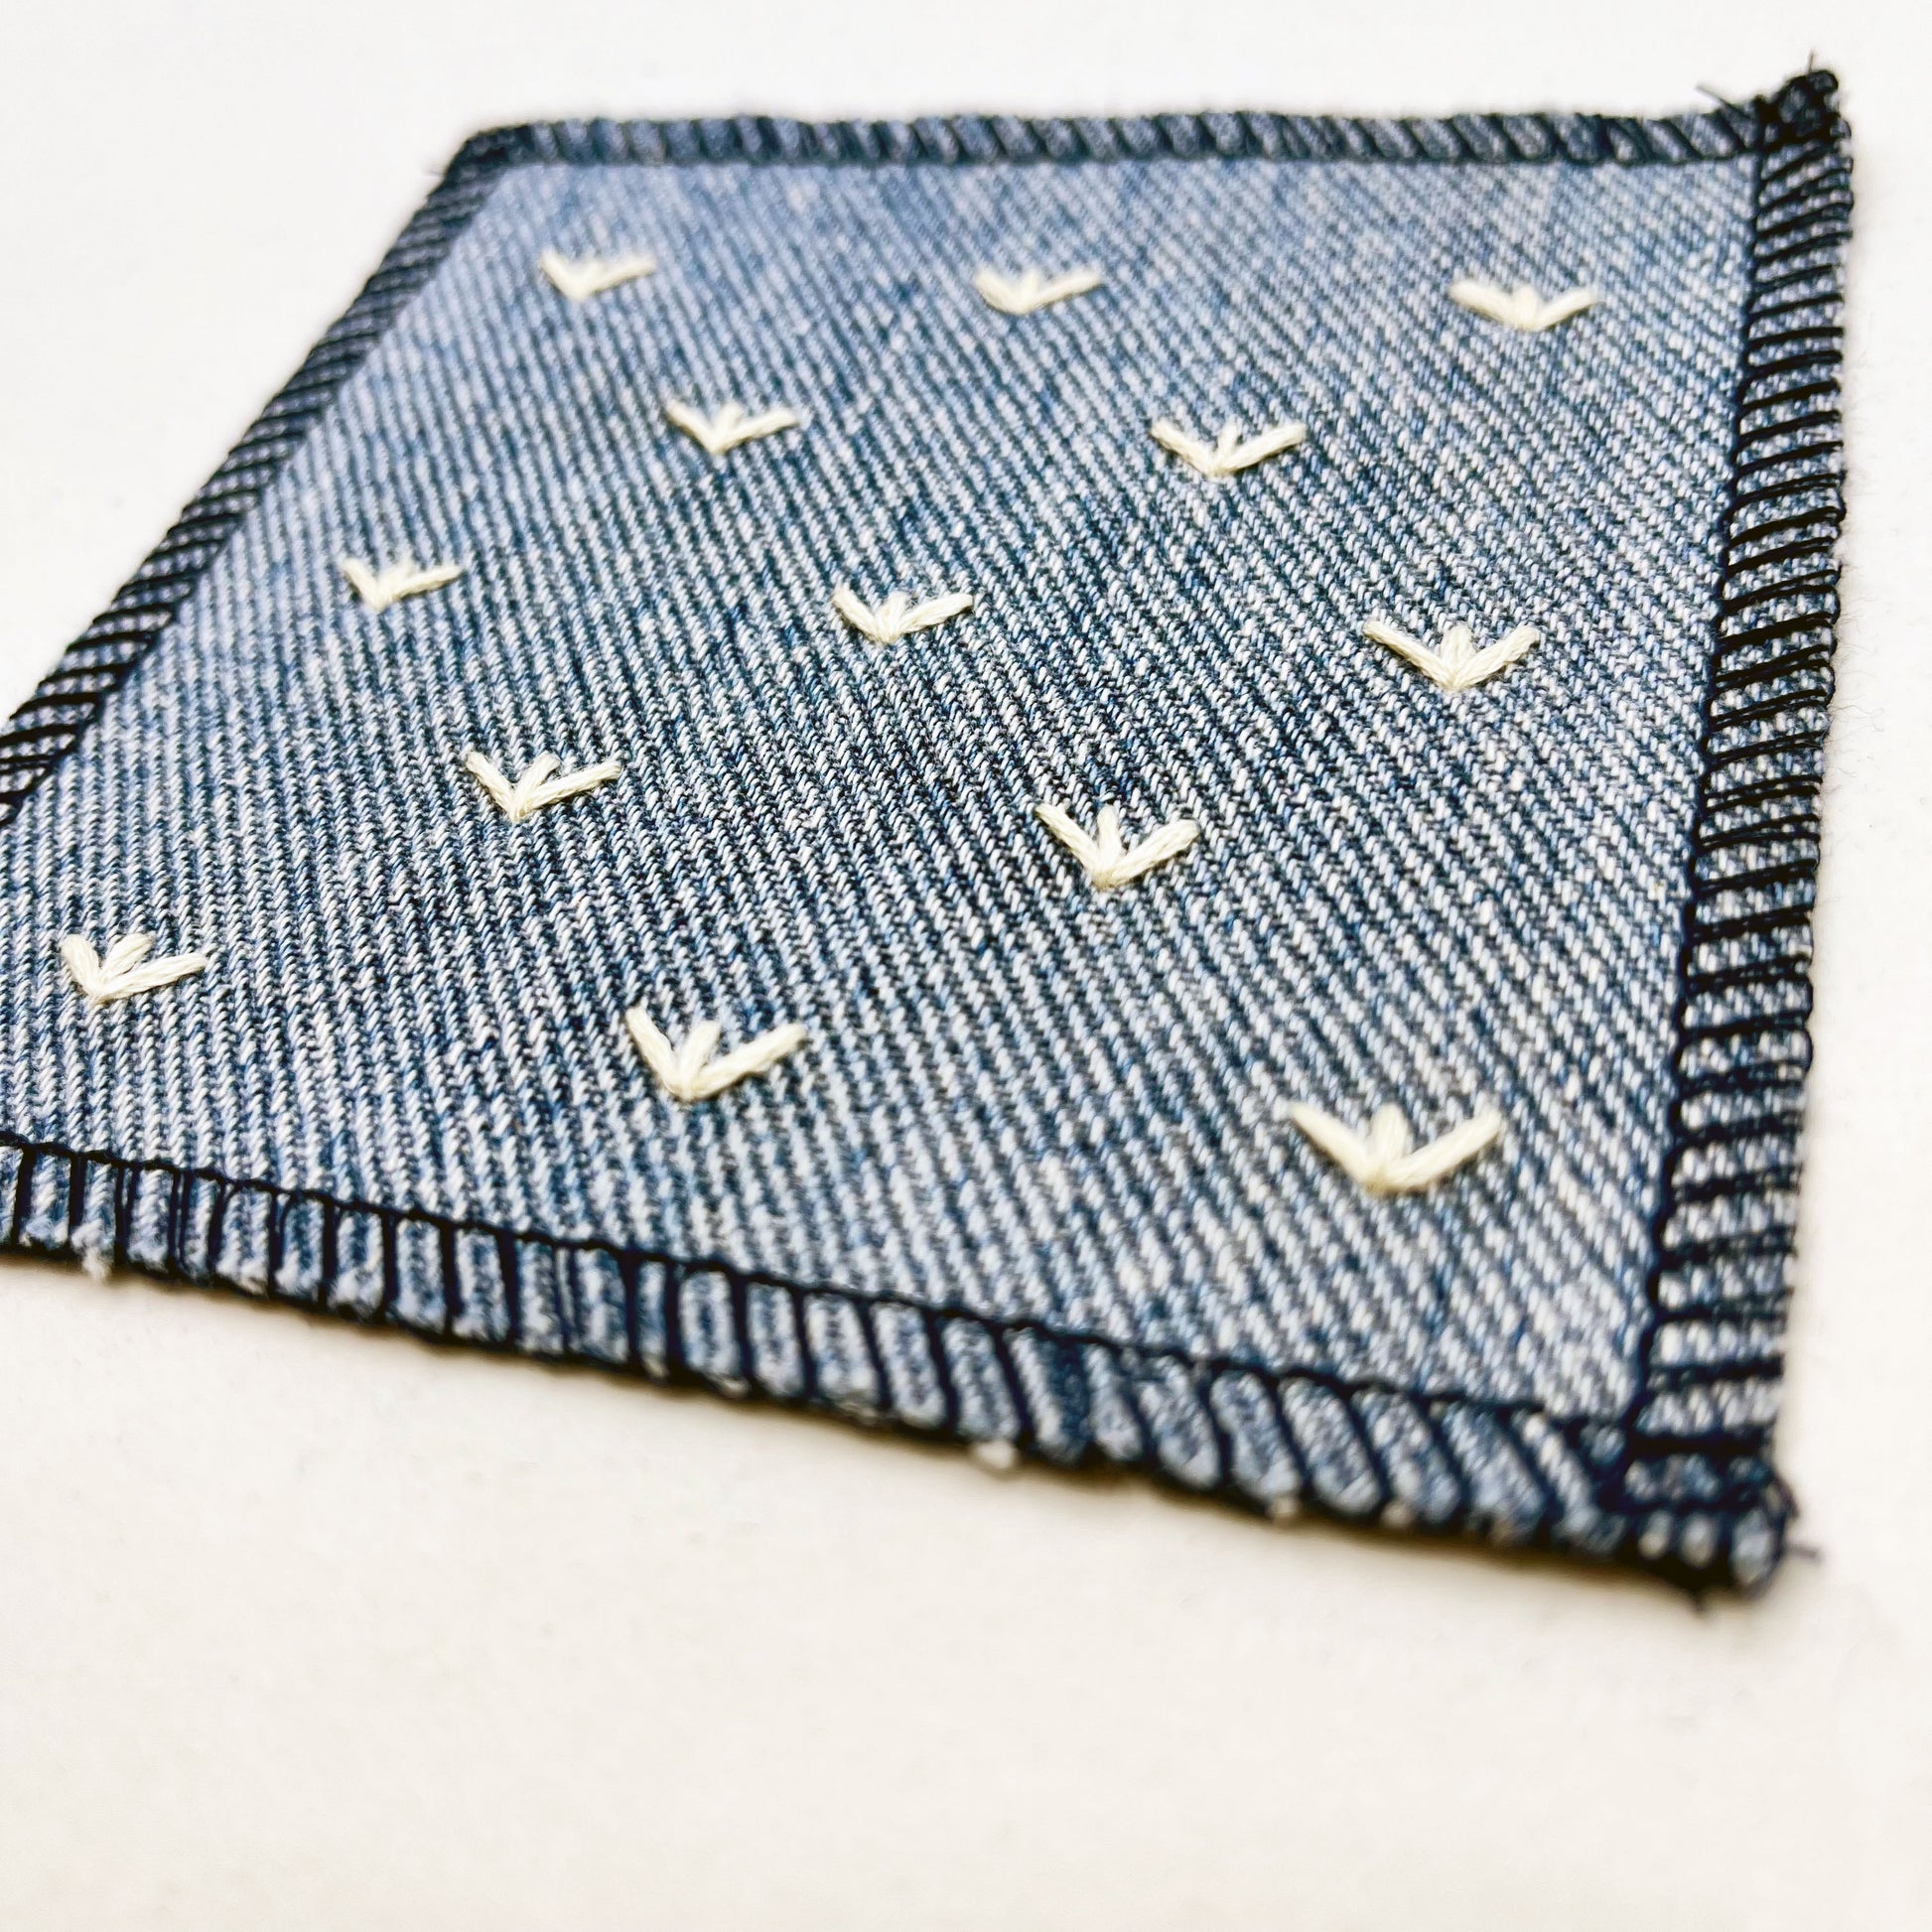 a close up angled view of a square denim patch, with ivory stitches that look like birds feet or sprouts spread out in a diamond pattern, with overlocked edges, on a white background